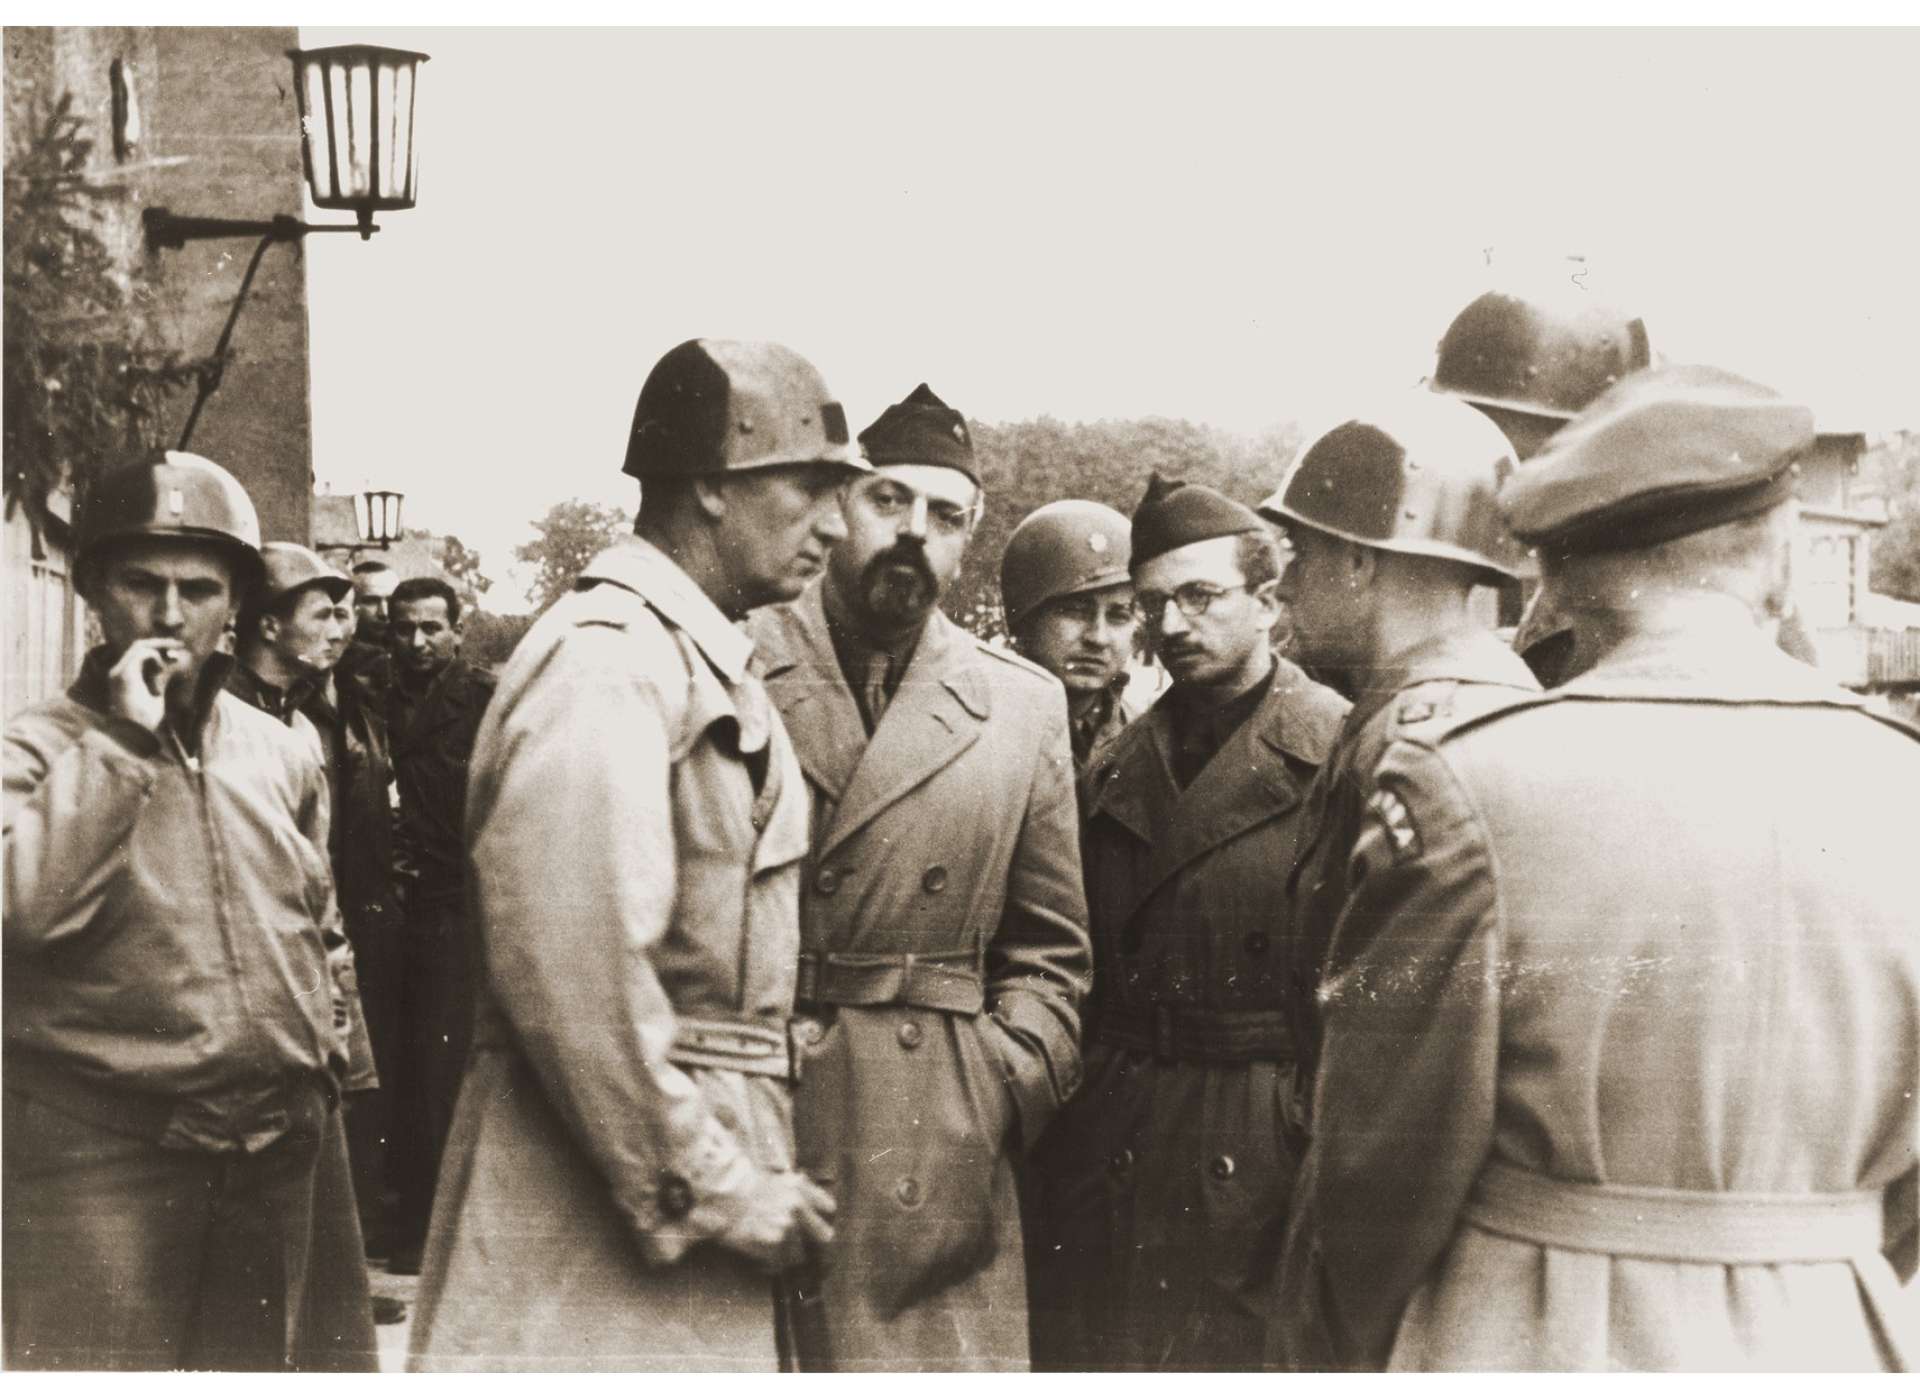 “American military officers meet with officials from UNRRA and the Joint Distribution Committee in the Landsberg displaced persons camp,” George Kadish and Zvi Kadushin, October 1945, Landsberg Germany, United States Holocaust Memorial Museum, courtesy of Irving Heymont, Photograph Number: 31963.